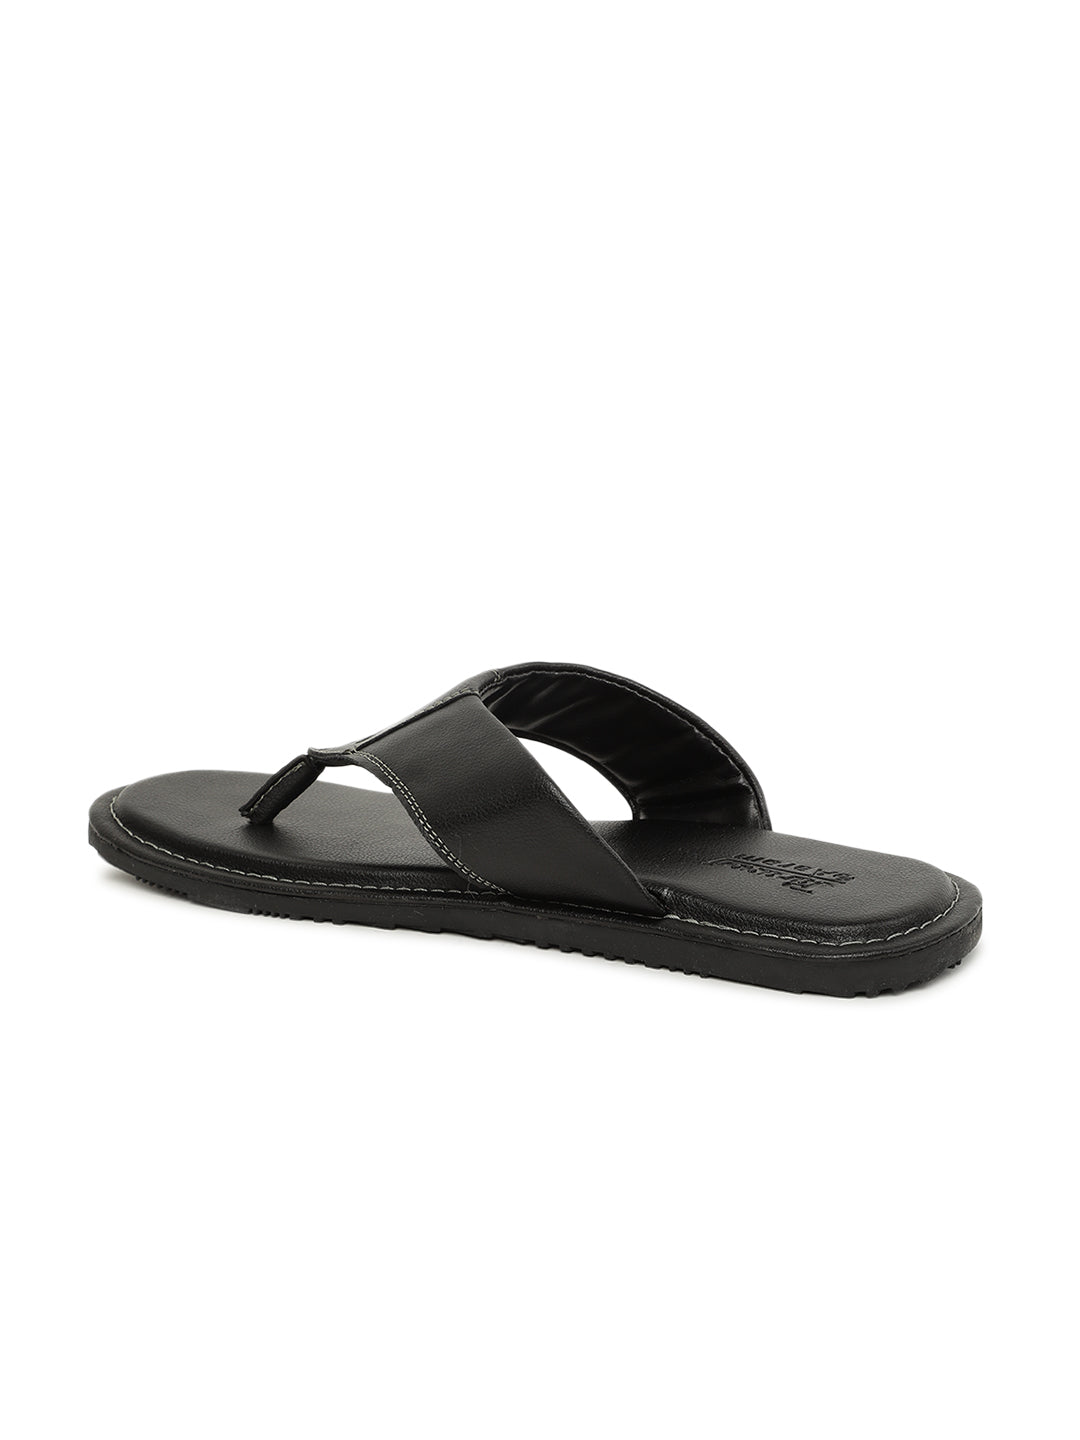 Paragon RFB2905G Men Stylish Lightweight Flipflops | Comfortable with Anti skid soles | Casual &amp; Trendy Slippers | Indoor &amp; Outdoor